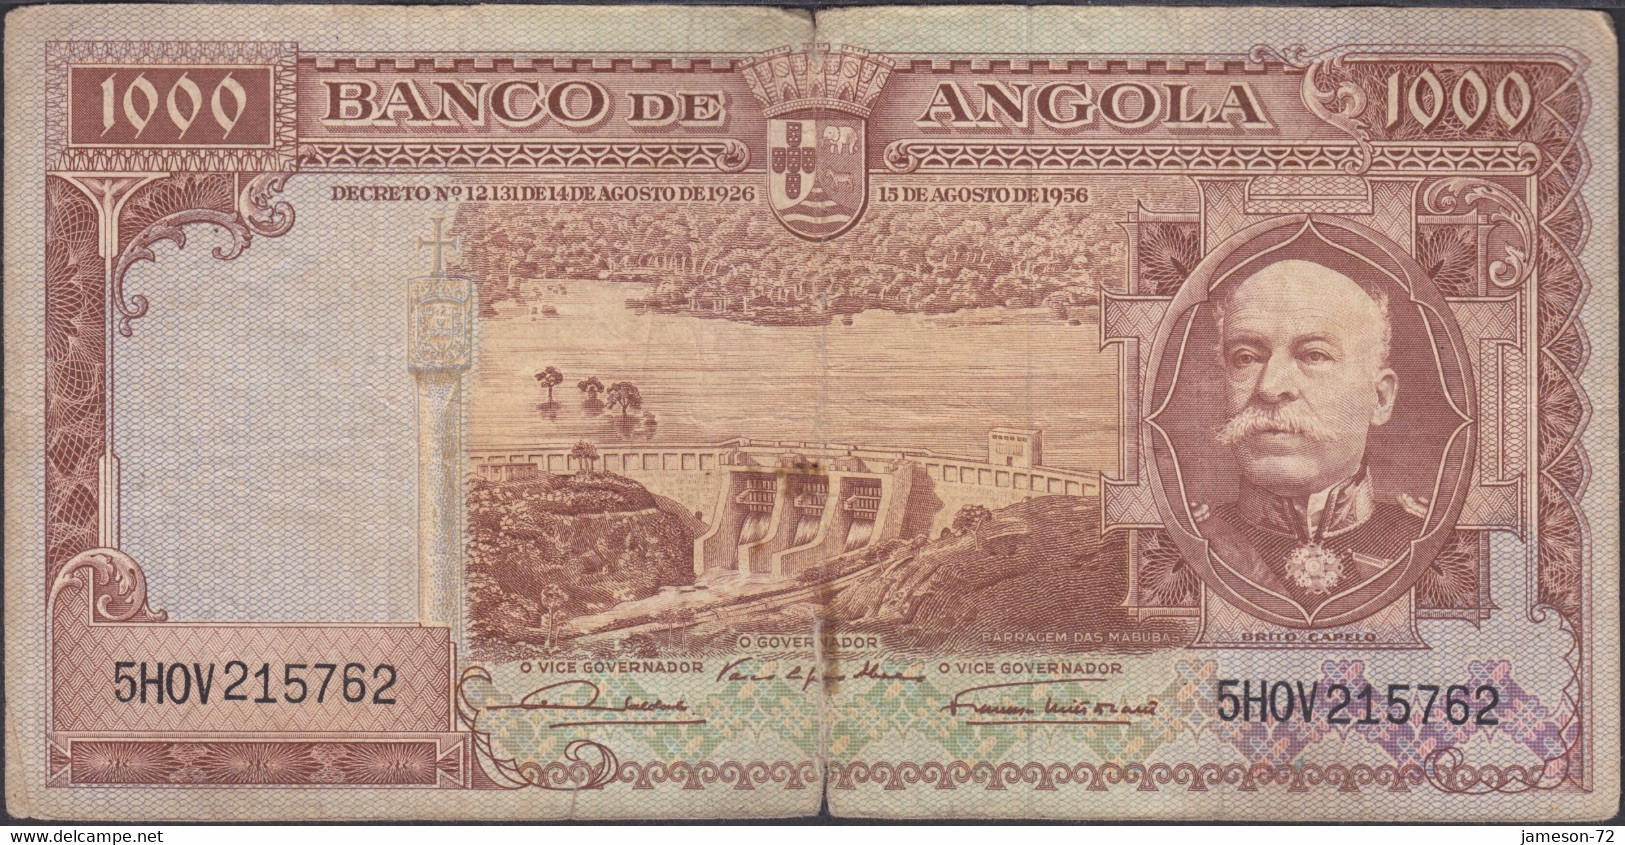 ANGOLA - 1000 Escudos 1956 P# 91 Africa Banknote - Edelweiss Coins - Angola